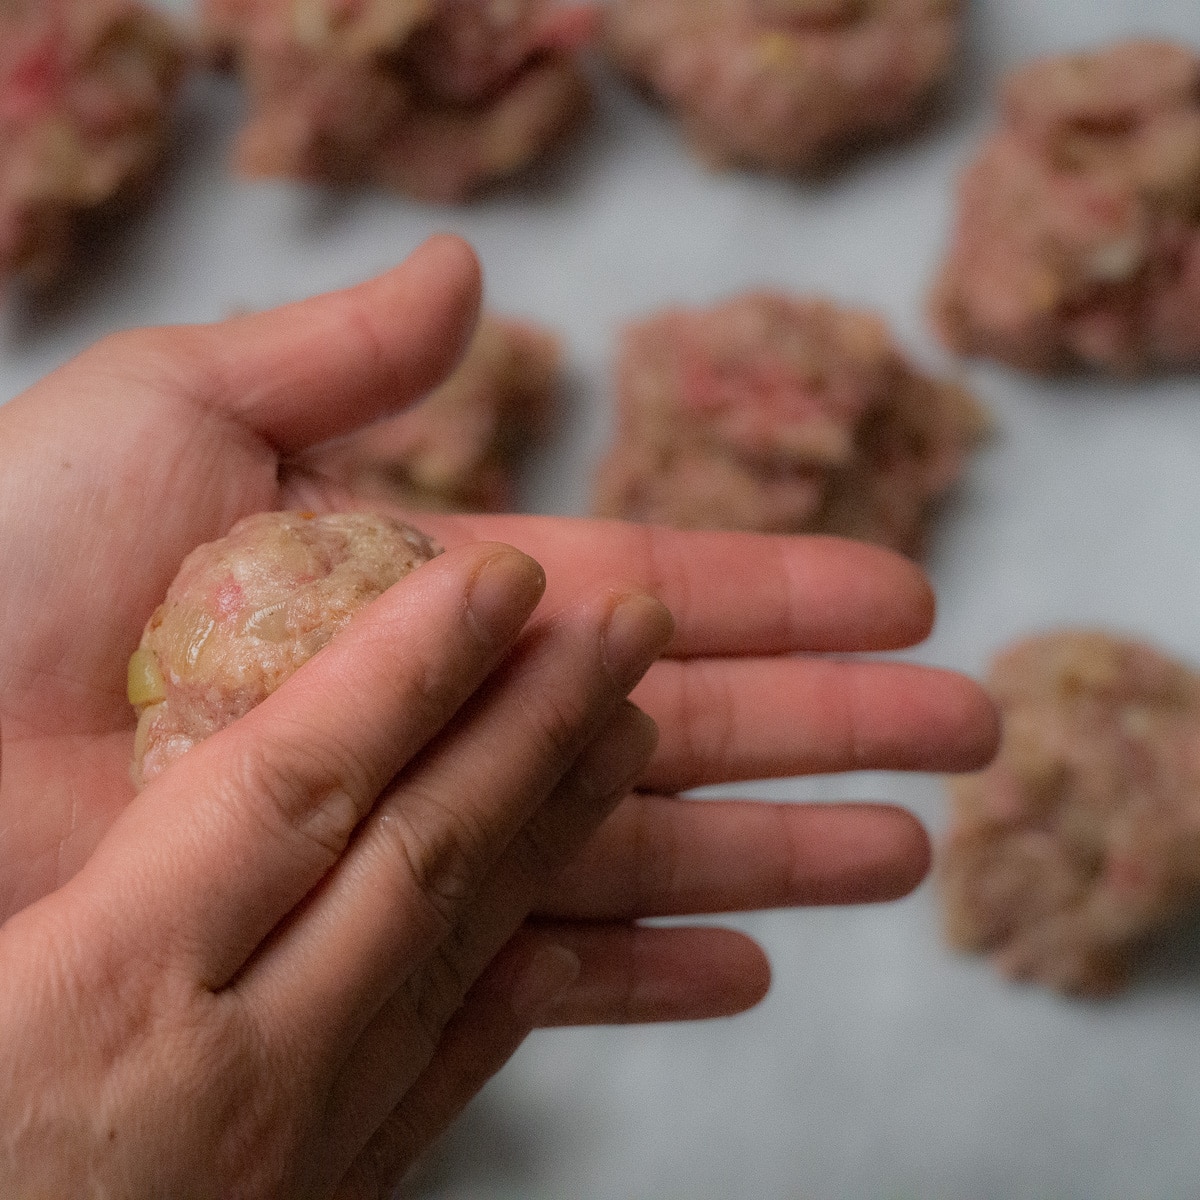 Rolling and shaping the potioned meatballs into balls.